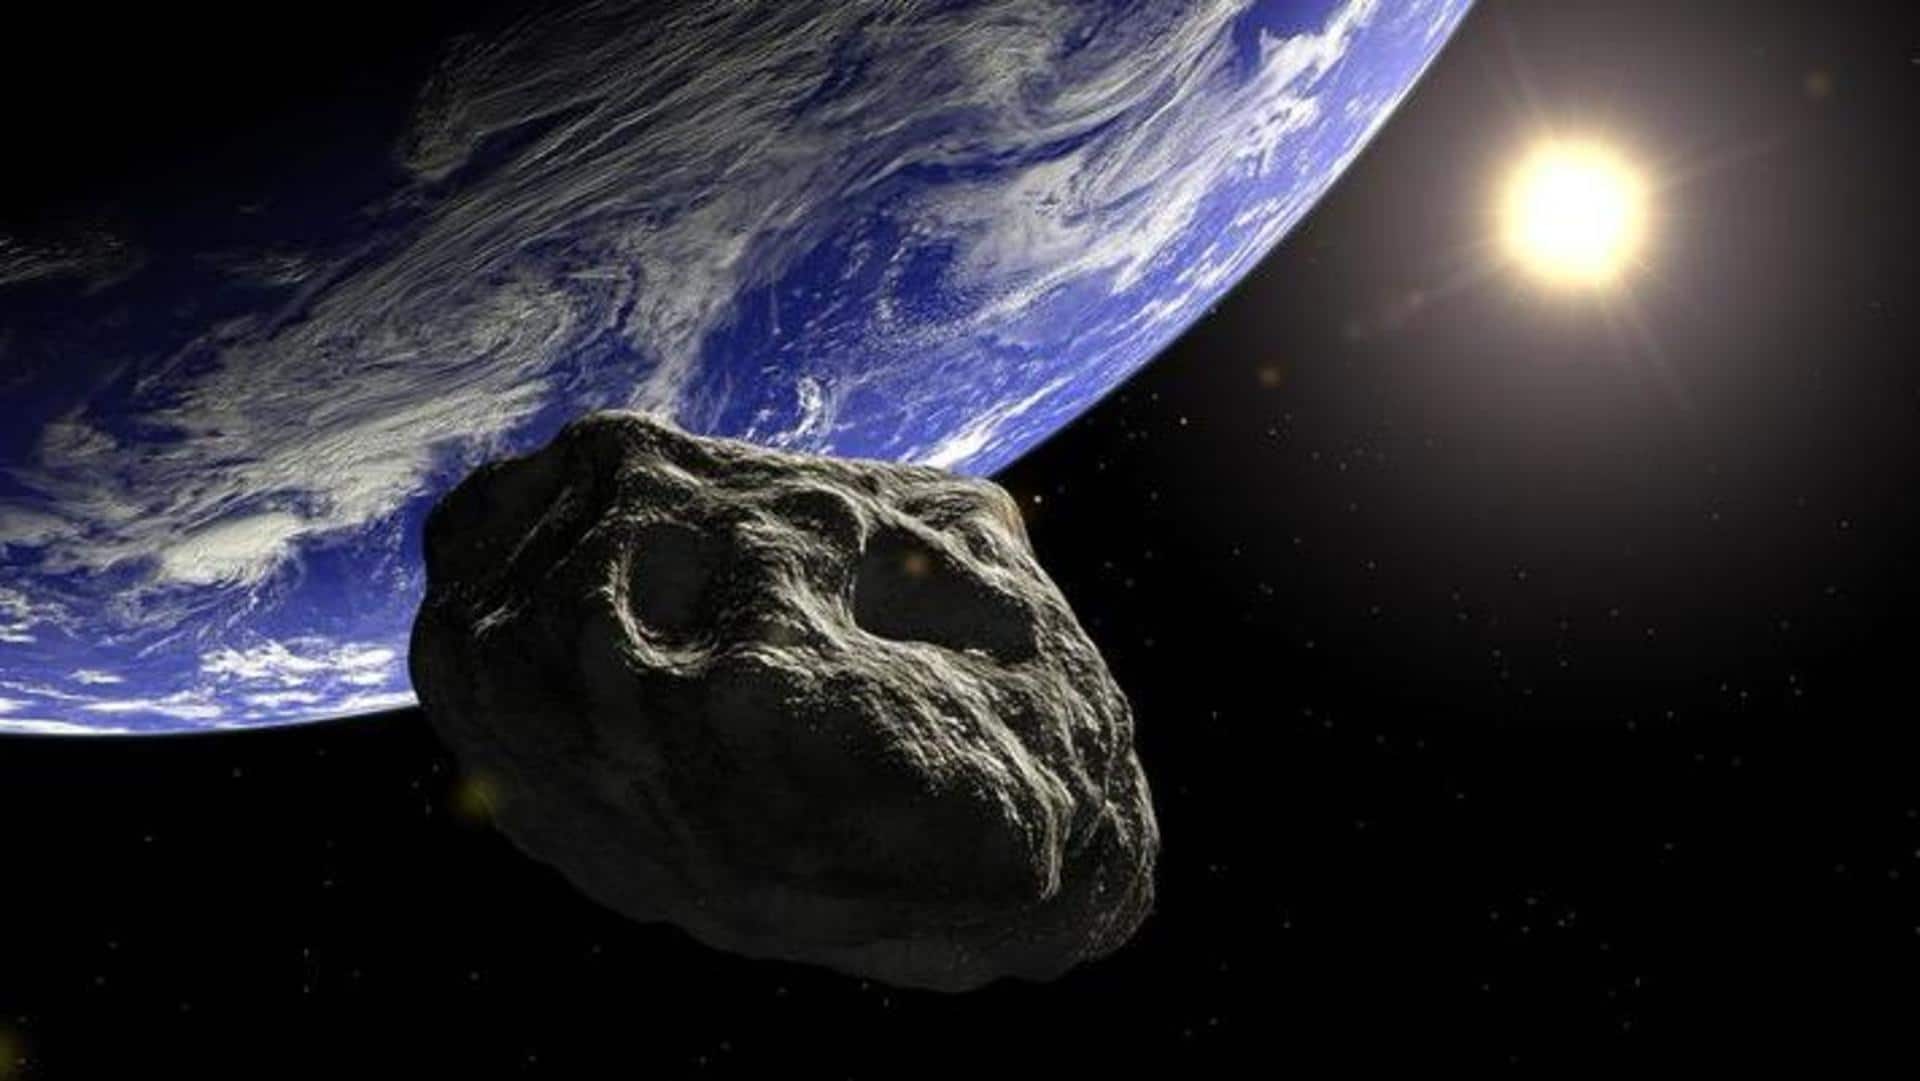 Skyscraper-sized asteroid to cross between Earth and Moon's orbit tomorrow